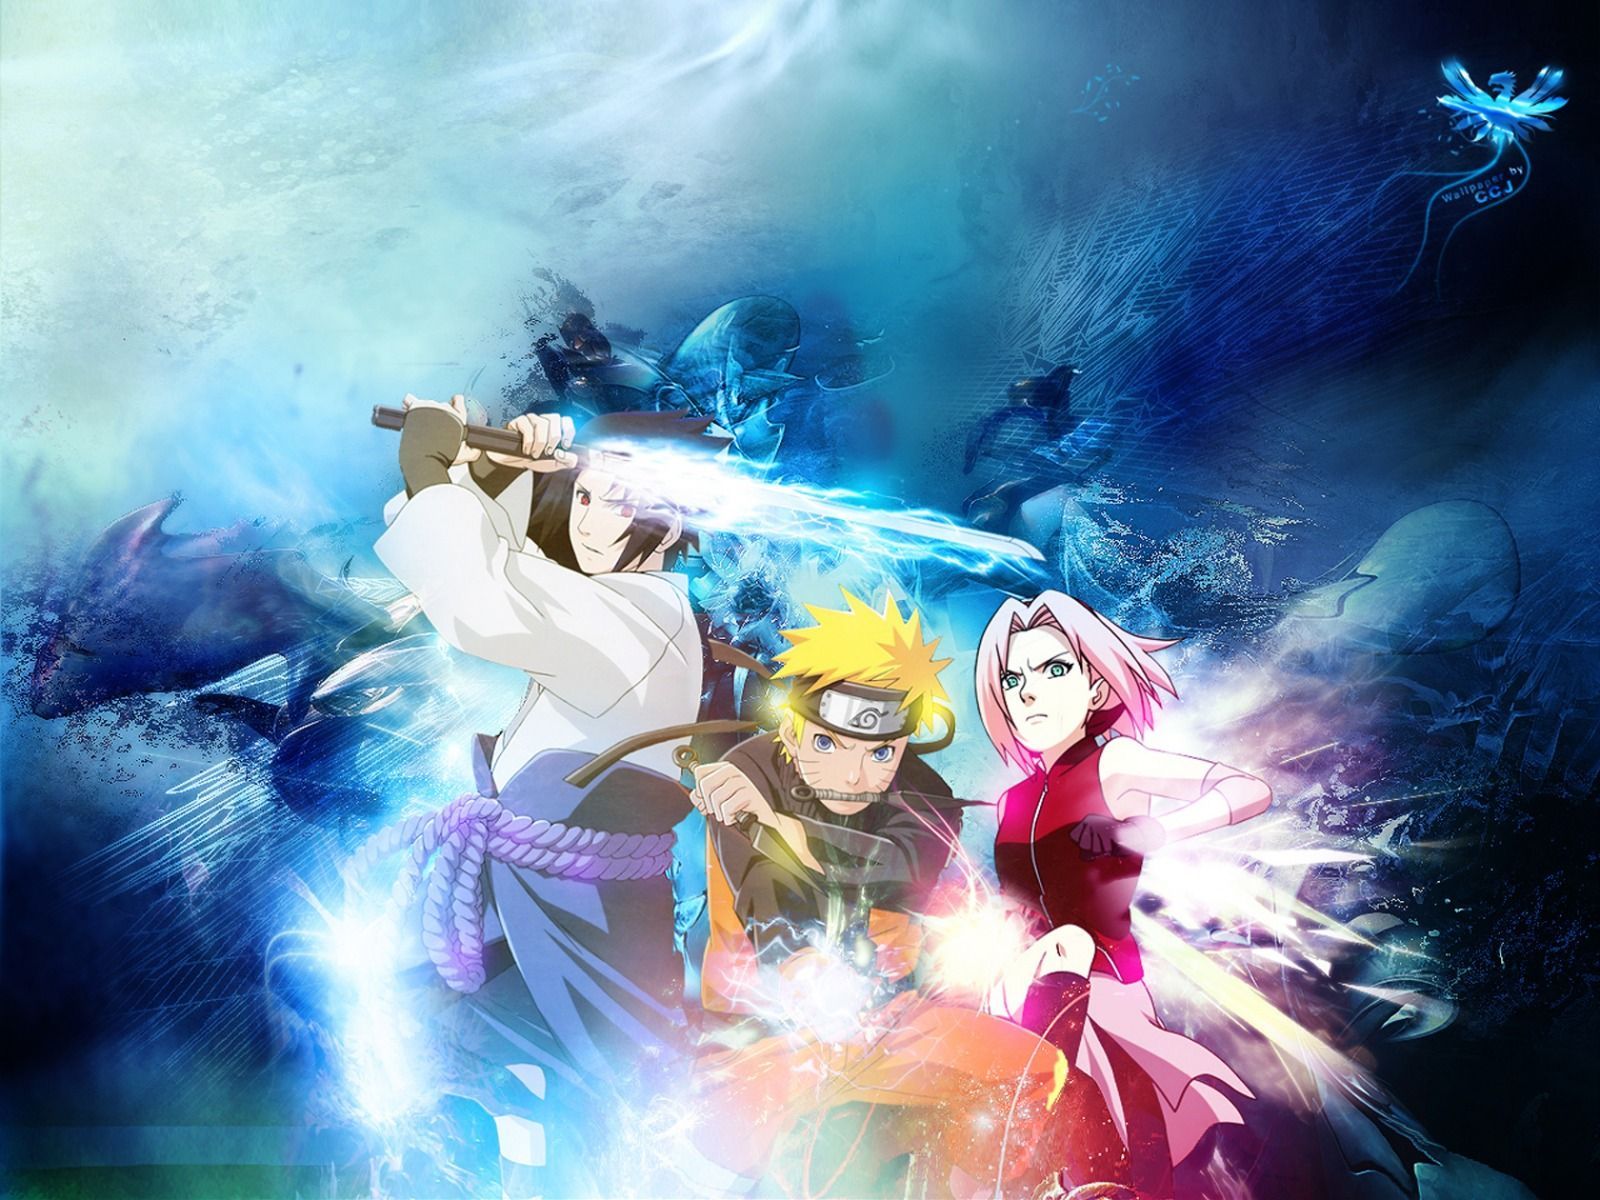 Naruto Shippuden Full Hd Wallpapers | One Piece HD Wallpapers